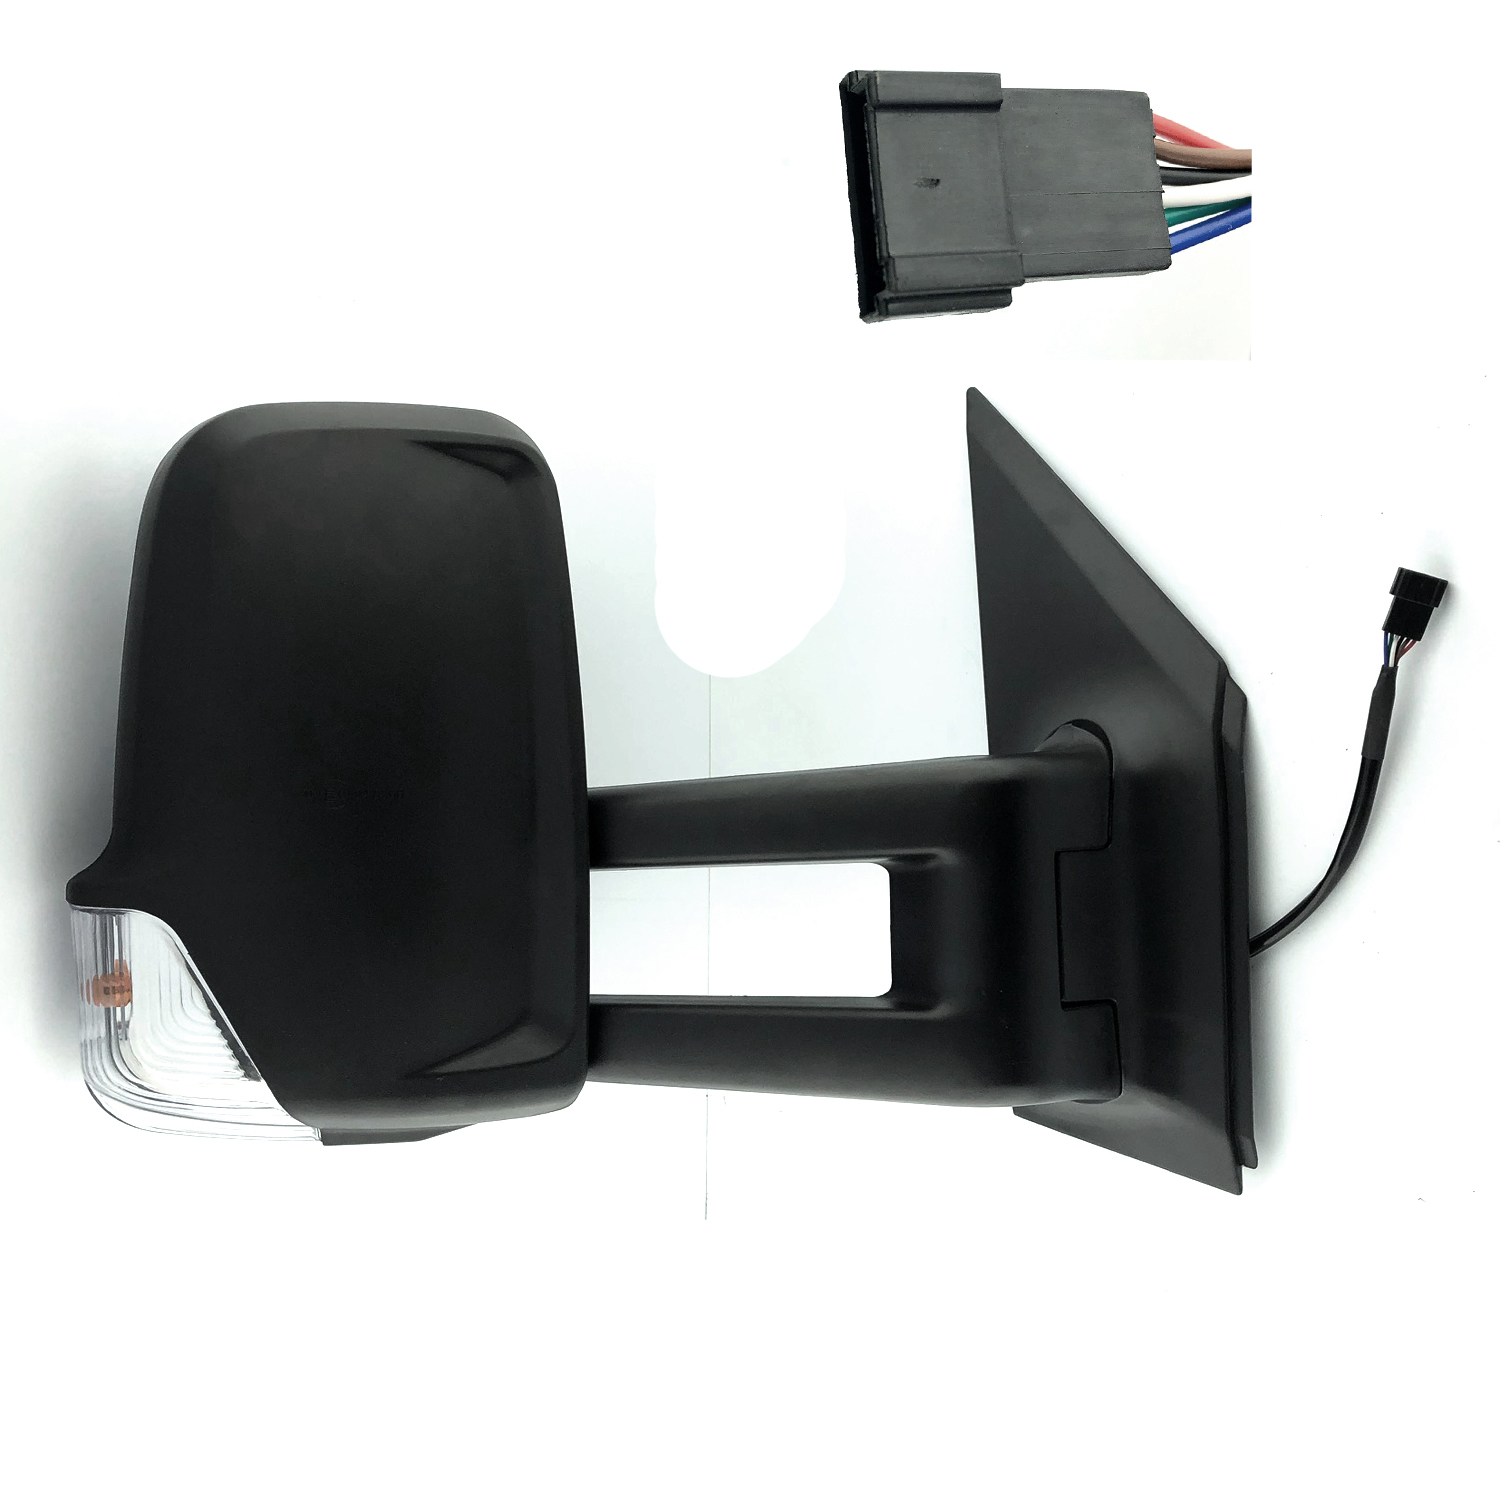 Mercedes Sprinter CHASSIS CAB Complete Wing Mirror Unit RIGHT HAND ( UK Driver Side ) 2012 to 2017 – Electric Wing Mirror Unit ( Long Arm )